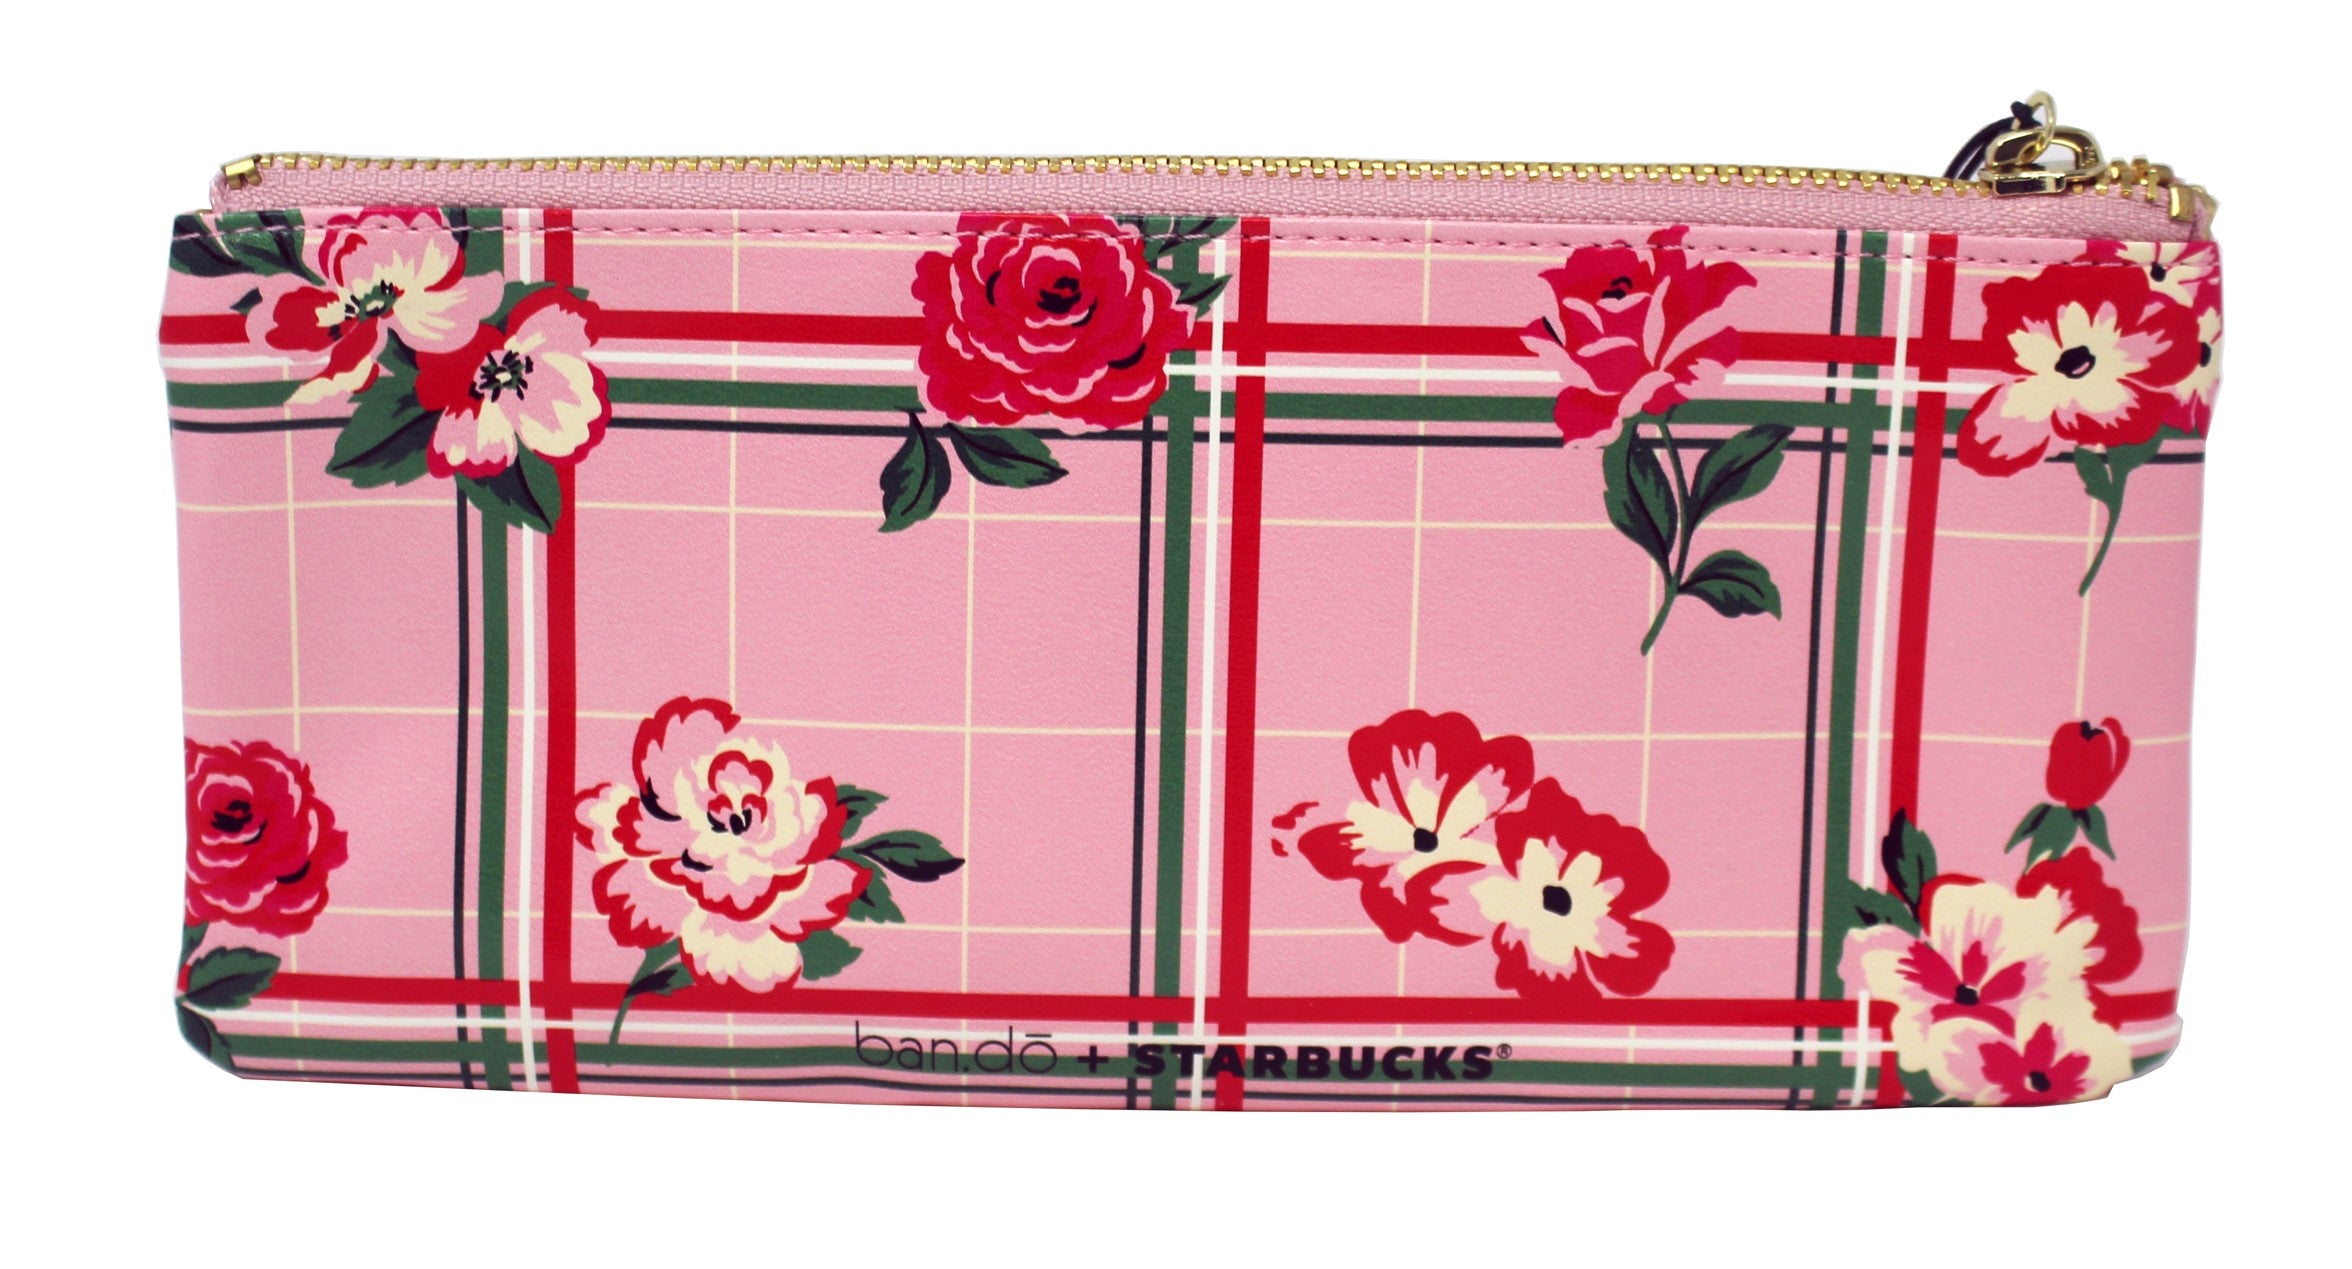 Starbucks Bando Floral Print Limited Edition Pencil Pouch